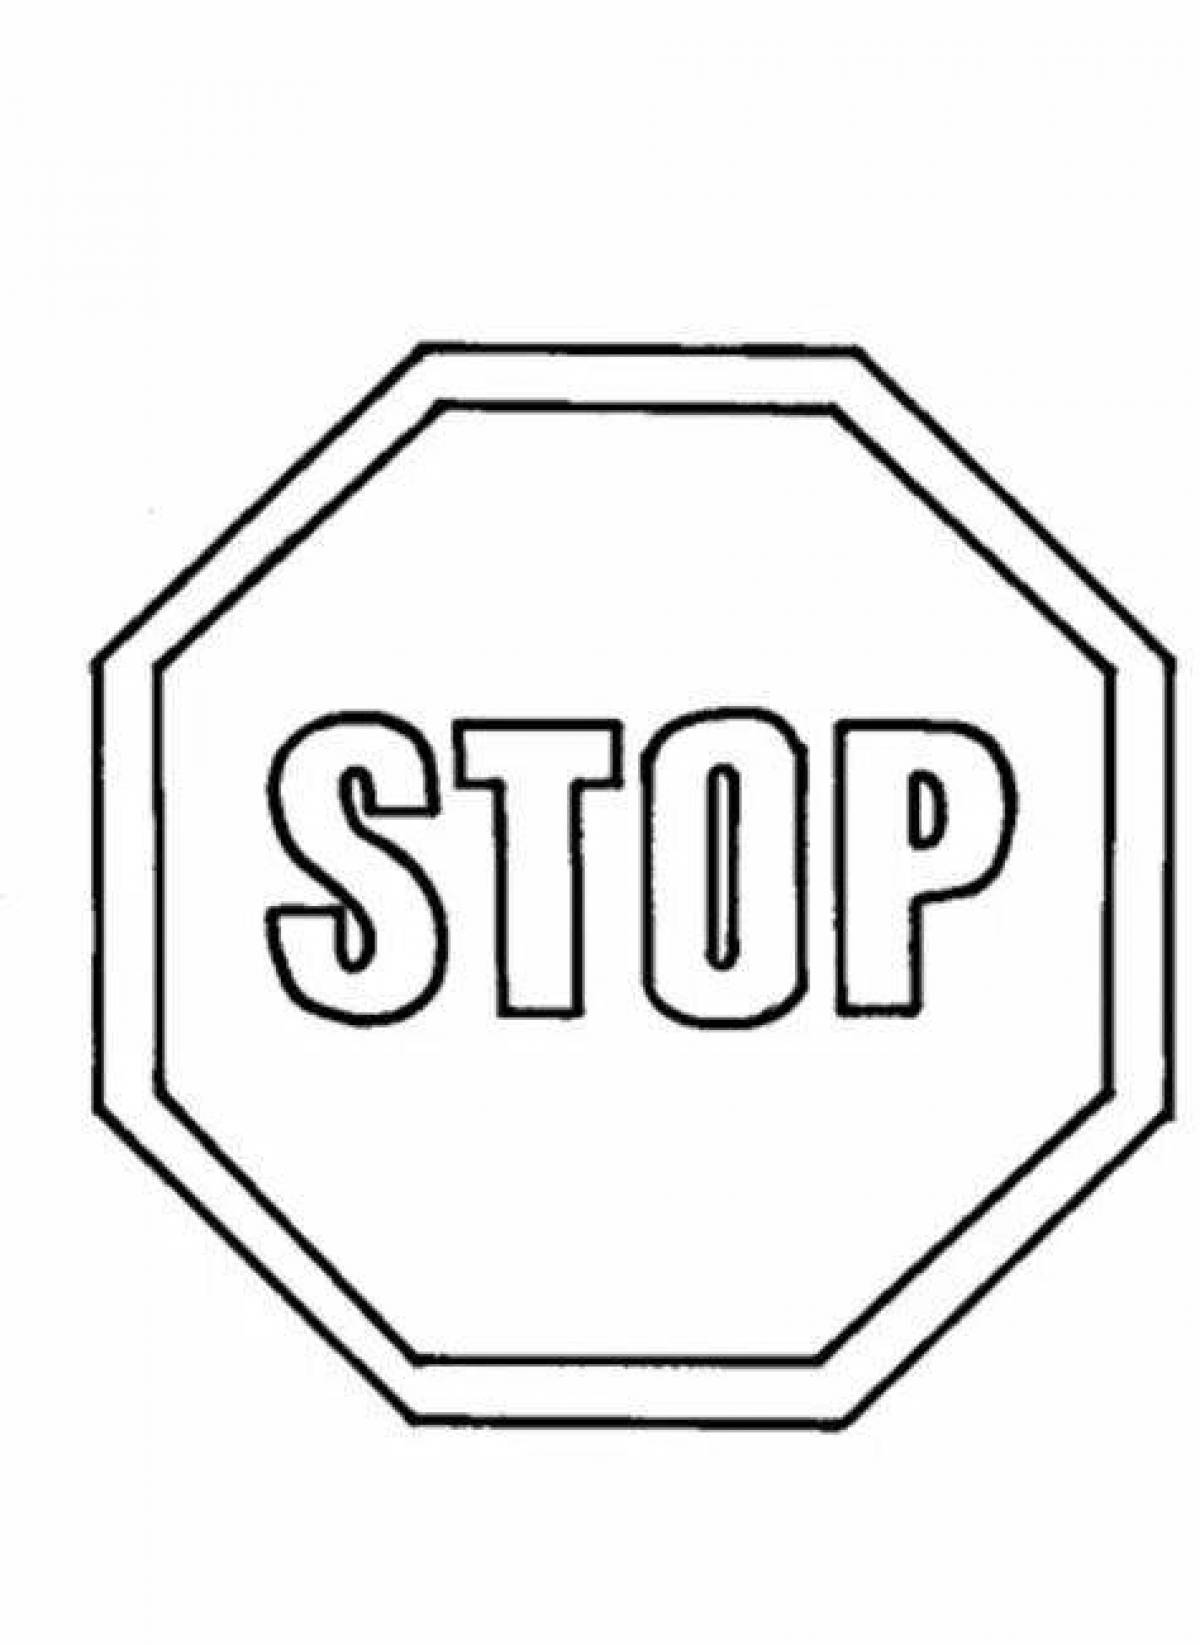 Gorgeous stop sign coloring page